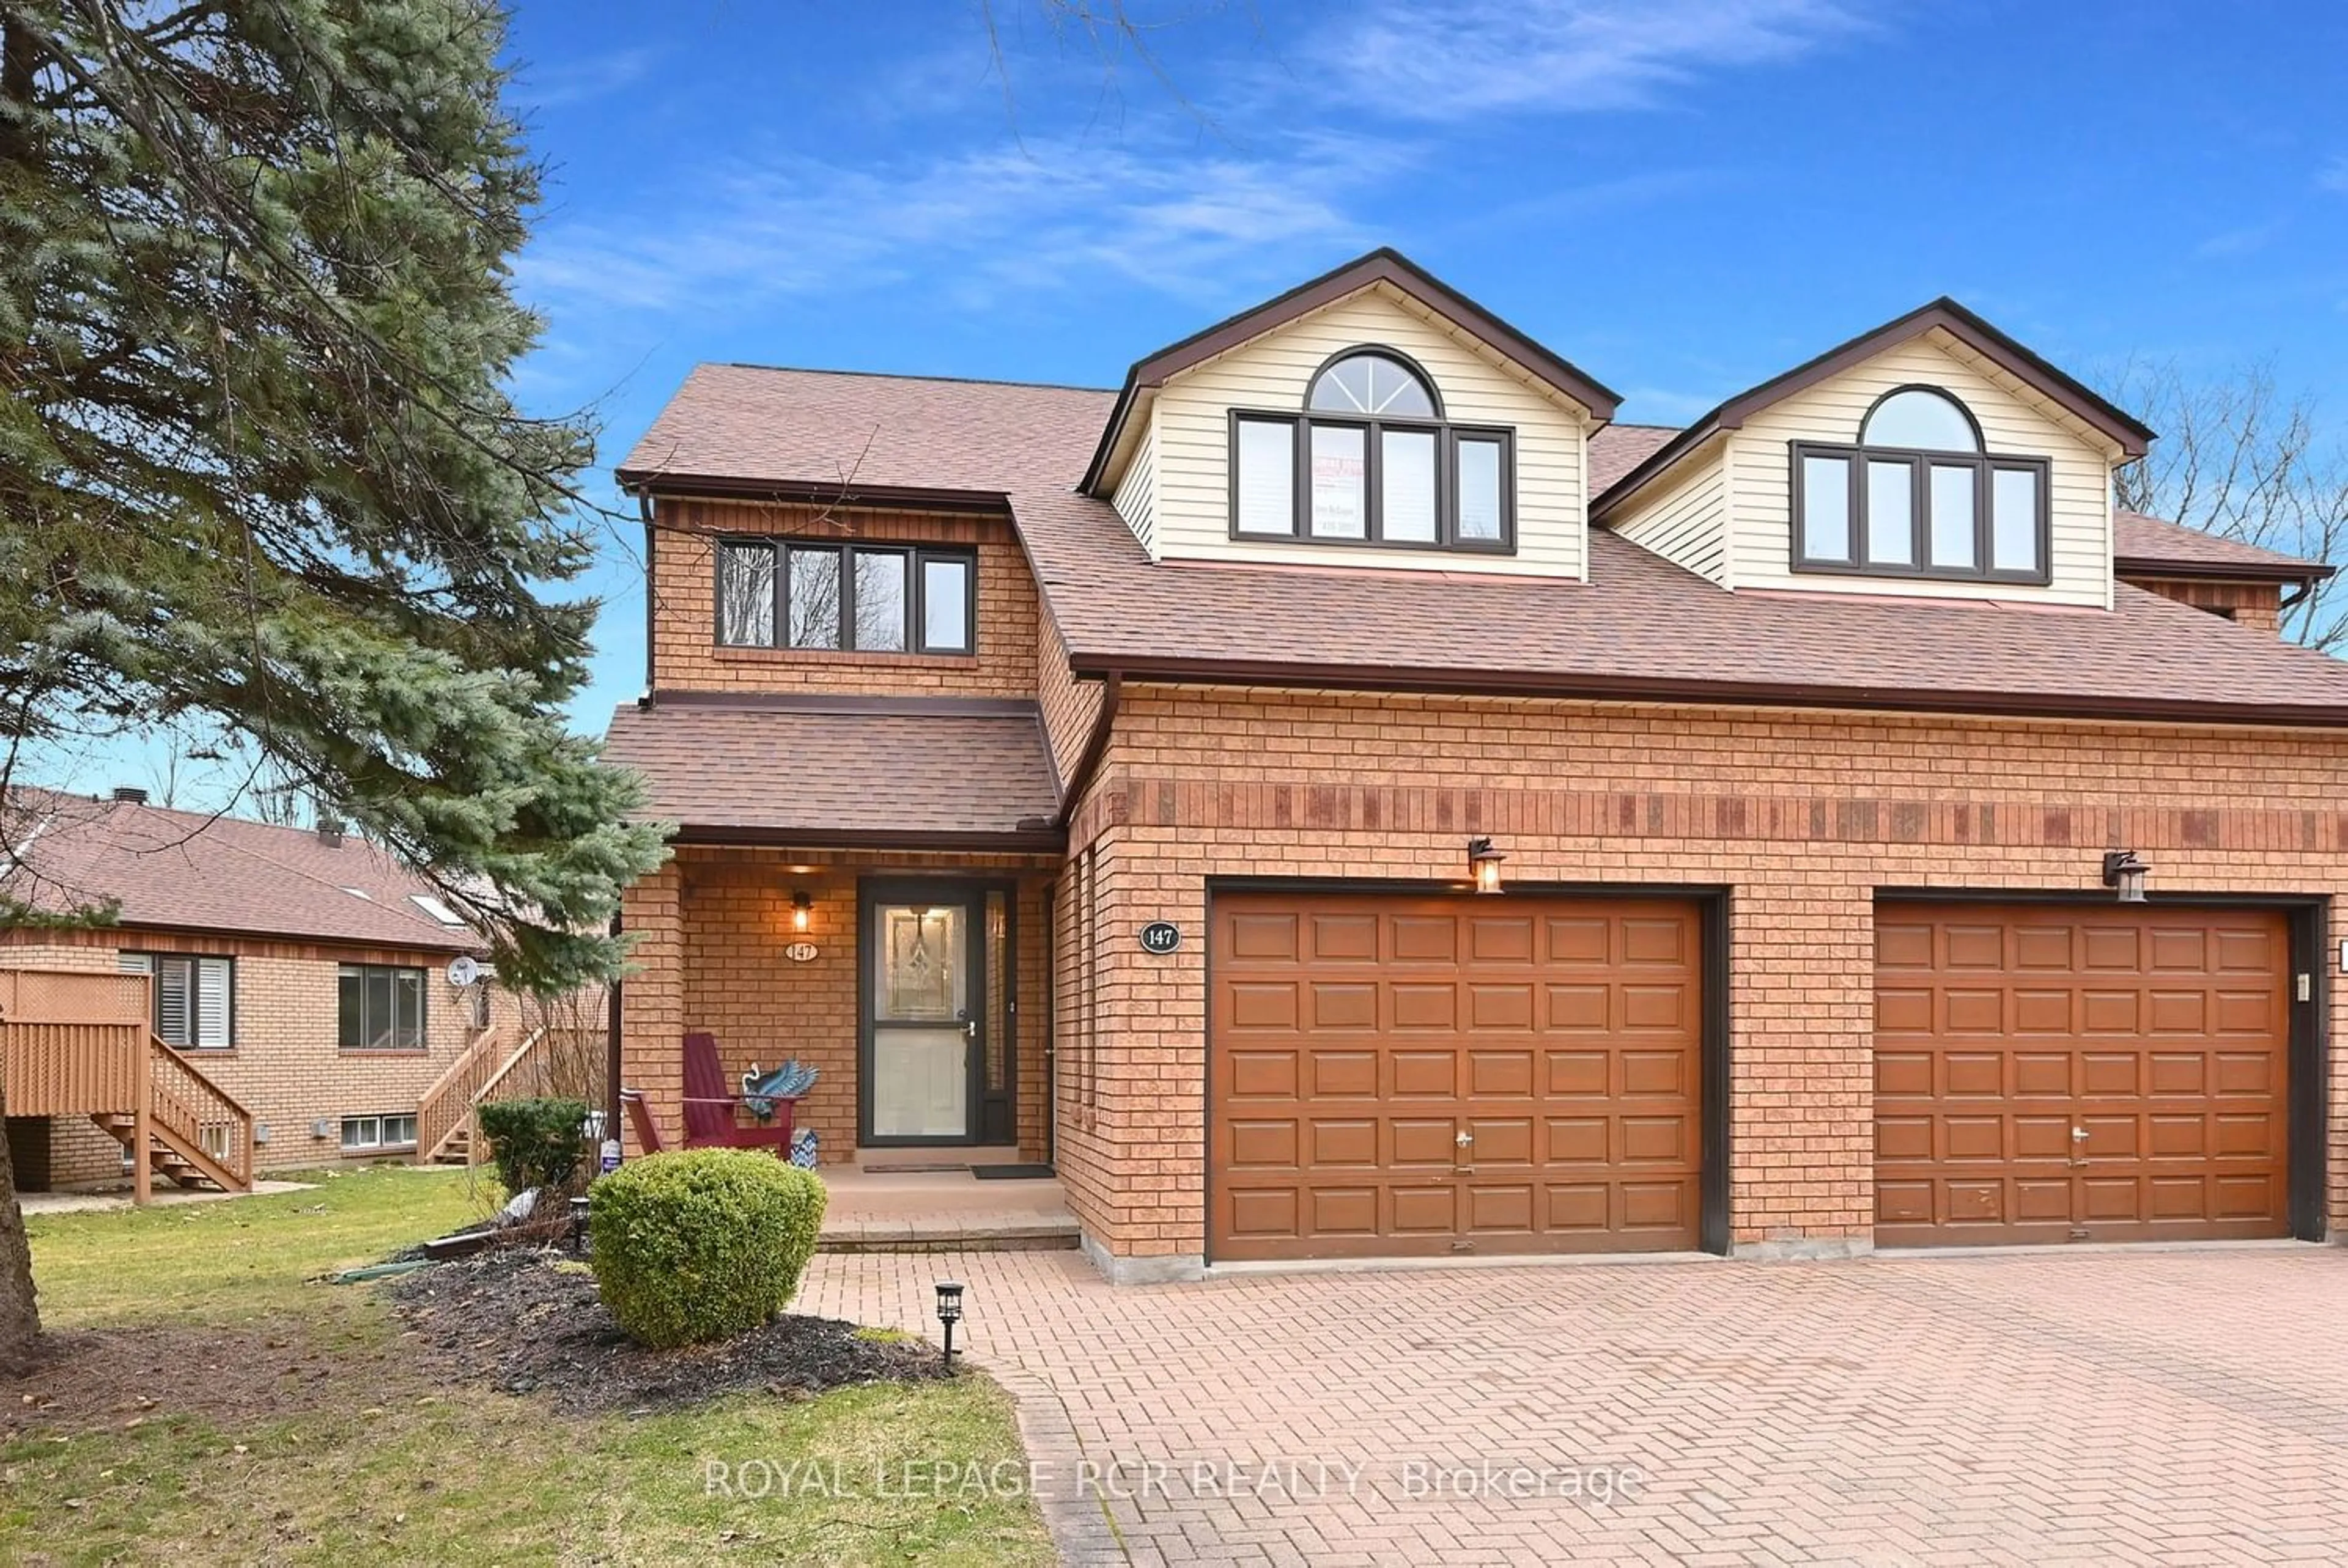 Home with brick exterior material for 147 Riverview Rd, New Tecumseth Ontario L9R 1Y2